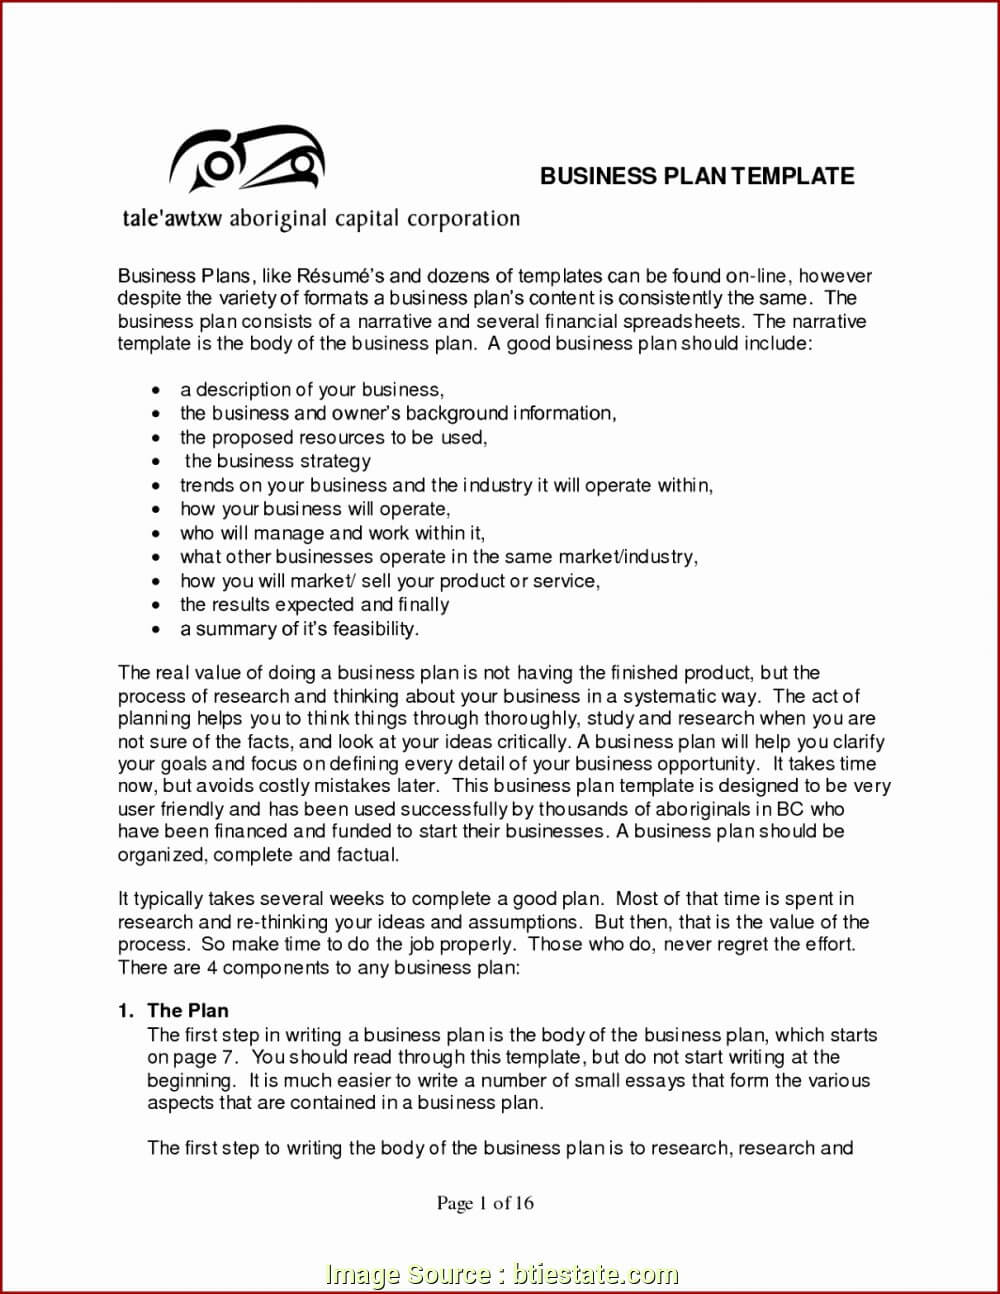 Business Plans For Bookkeeper Plan Bookshop Pdf Kit Dummies With Regard To Bookstore Business Plan Template